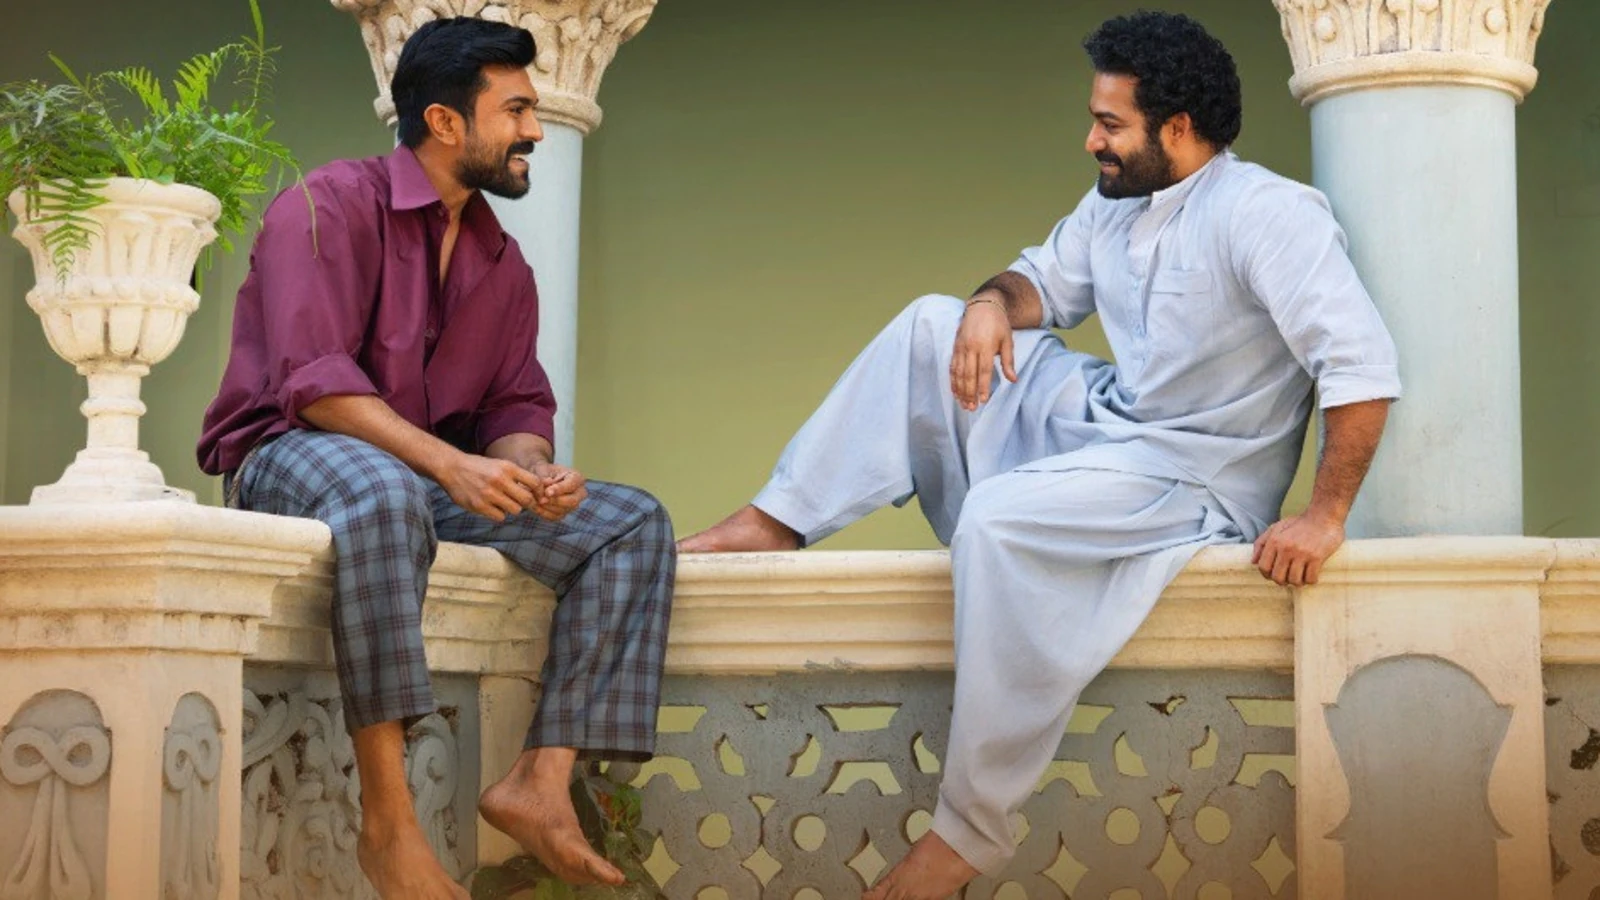 RRR box office day 2 collection: SS Rajamouli film crosses ₹371 worldwide, eyes Baahubali 2’s opening weekend record